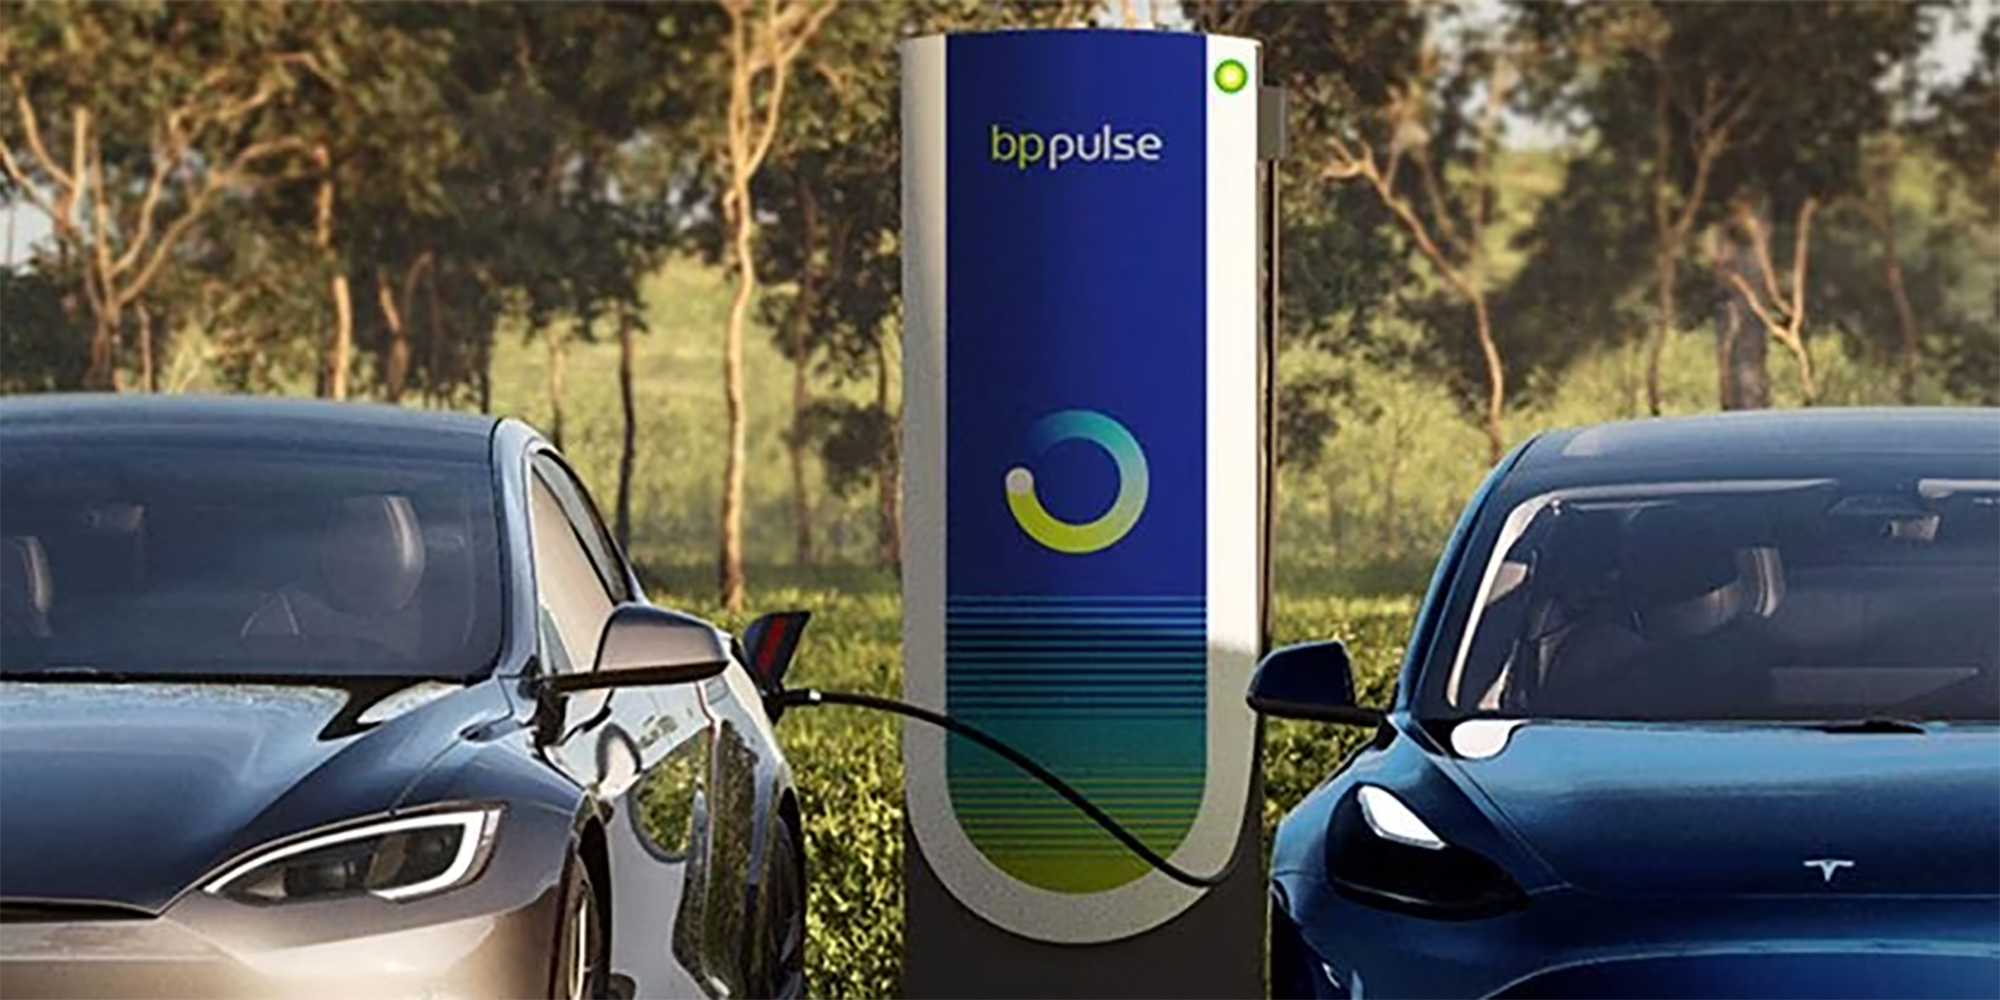 Future Tesla-Powered BP Pulse Stations Popping Up, Possibly Near El Paso - CleanTechnica